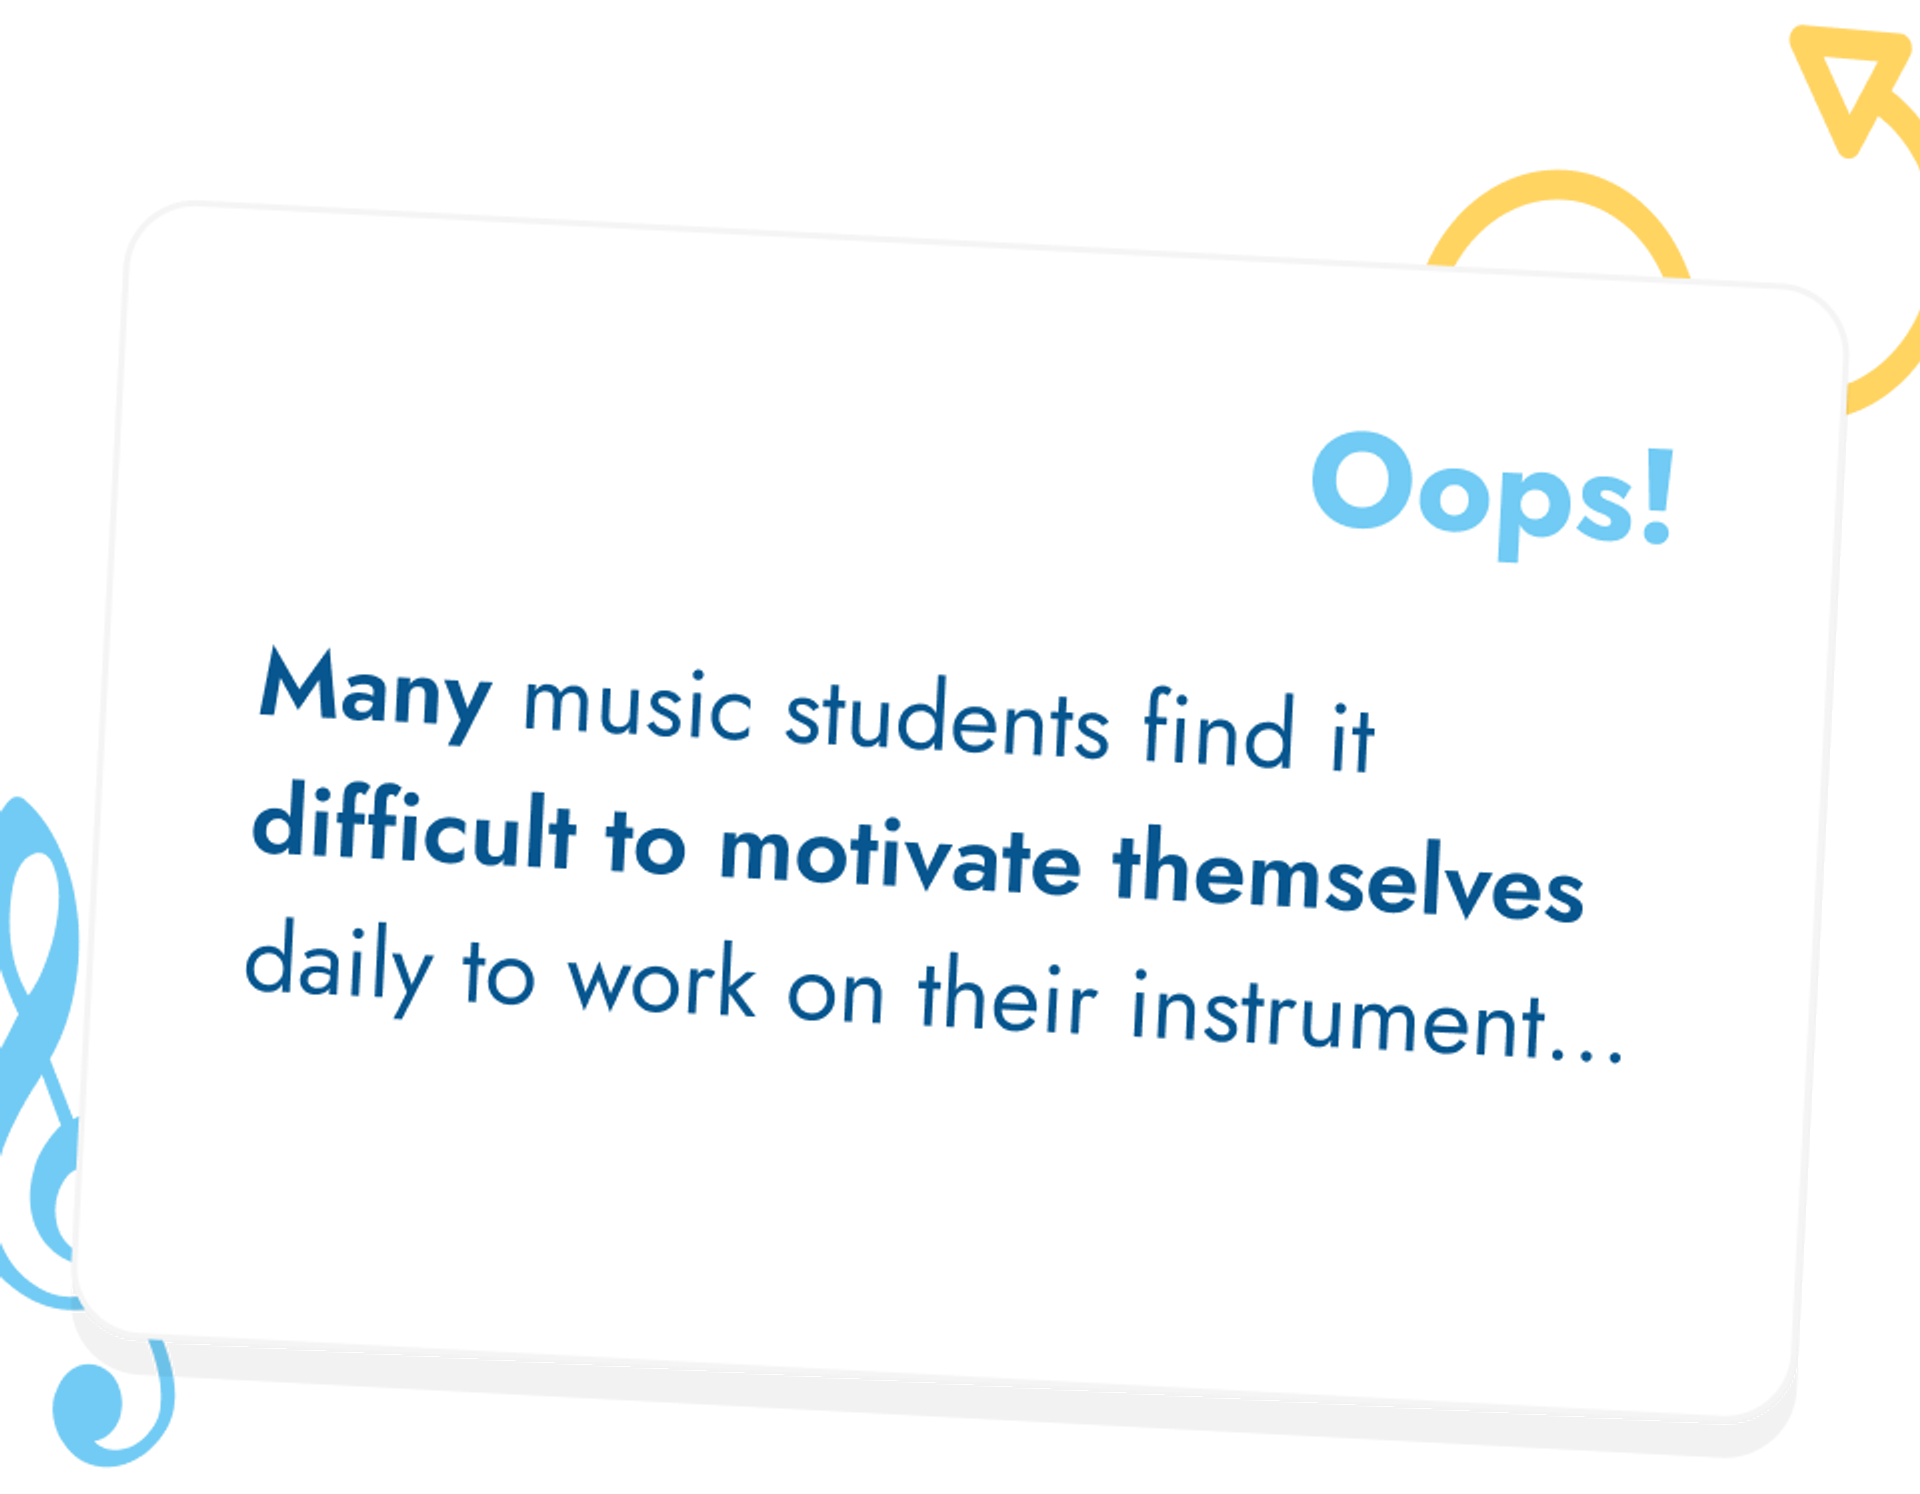 Many music students find it difficult to motivate themselves daily to work on their instrument...